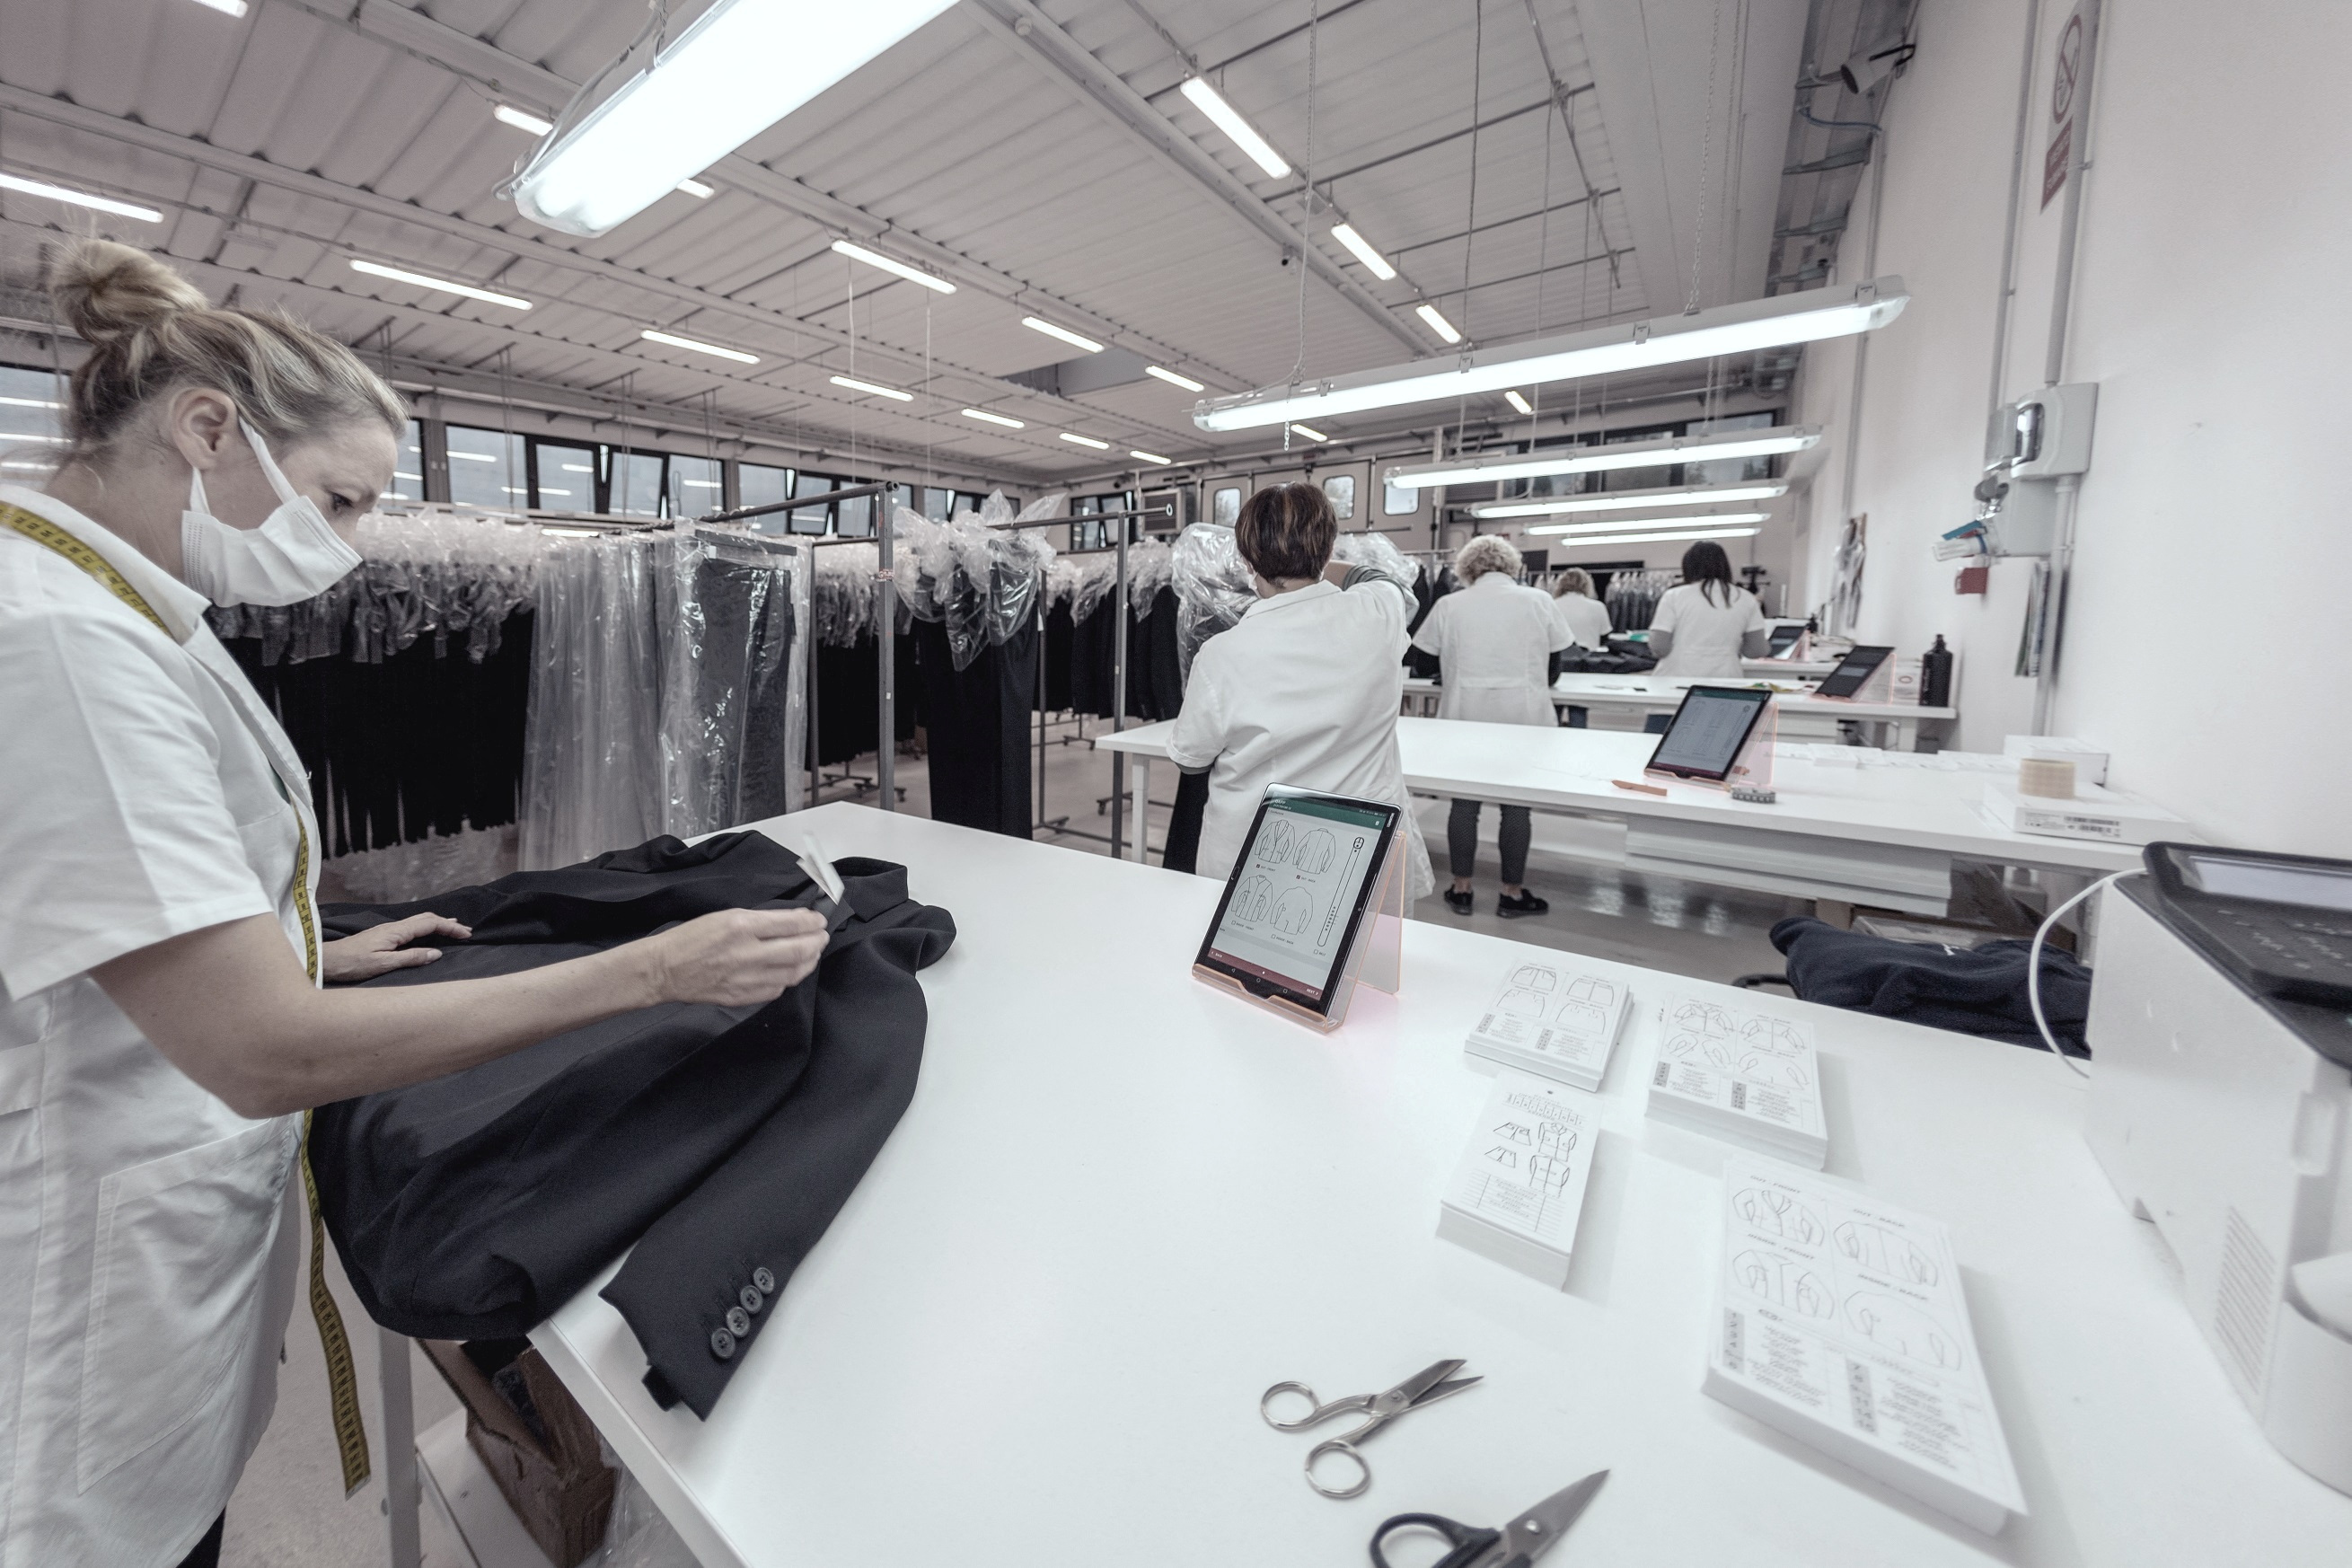 Giuntini employees work with designs of jackets for luxury brands, in Peccioli